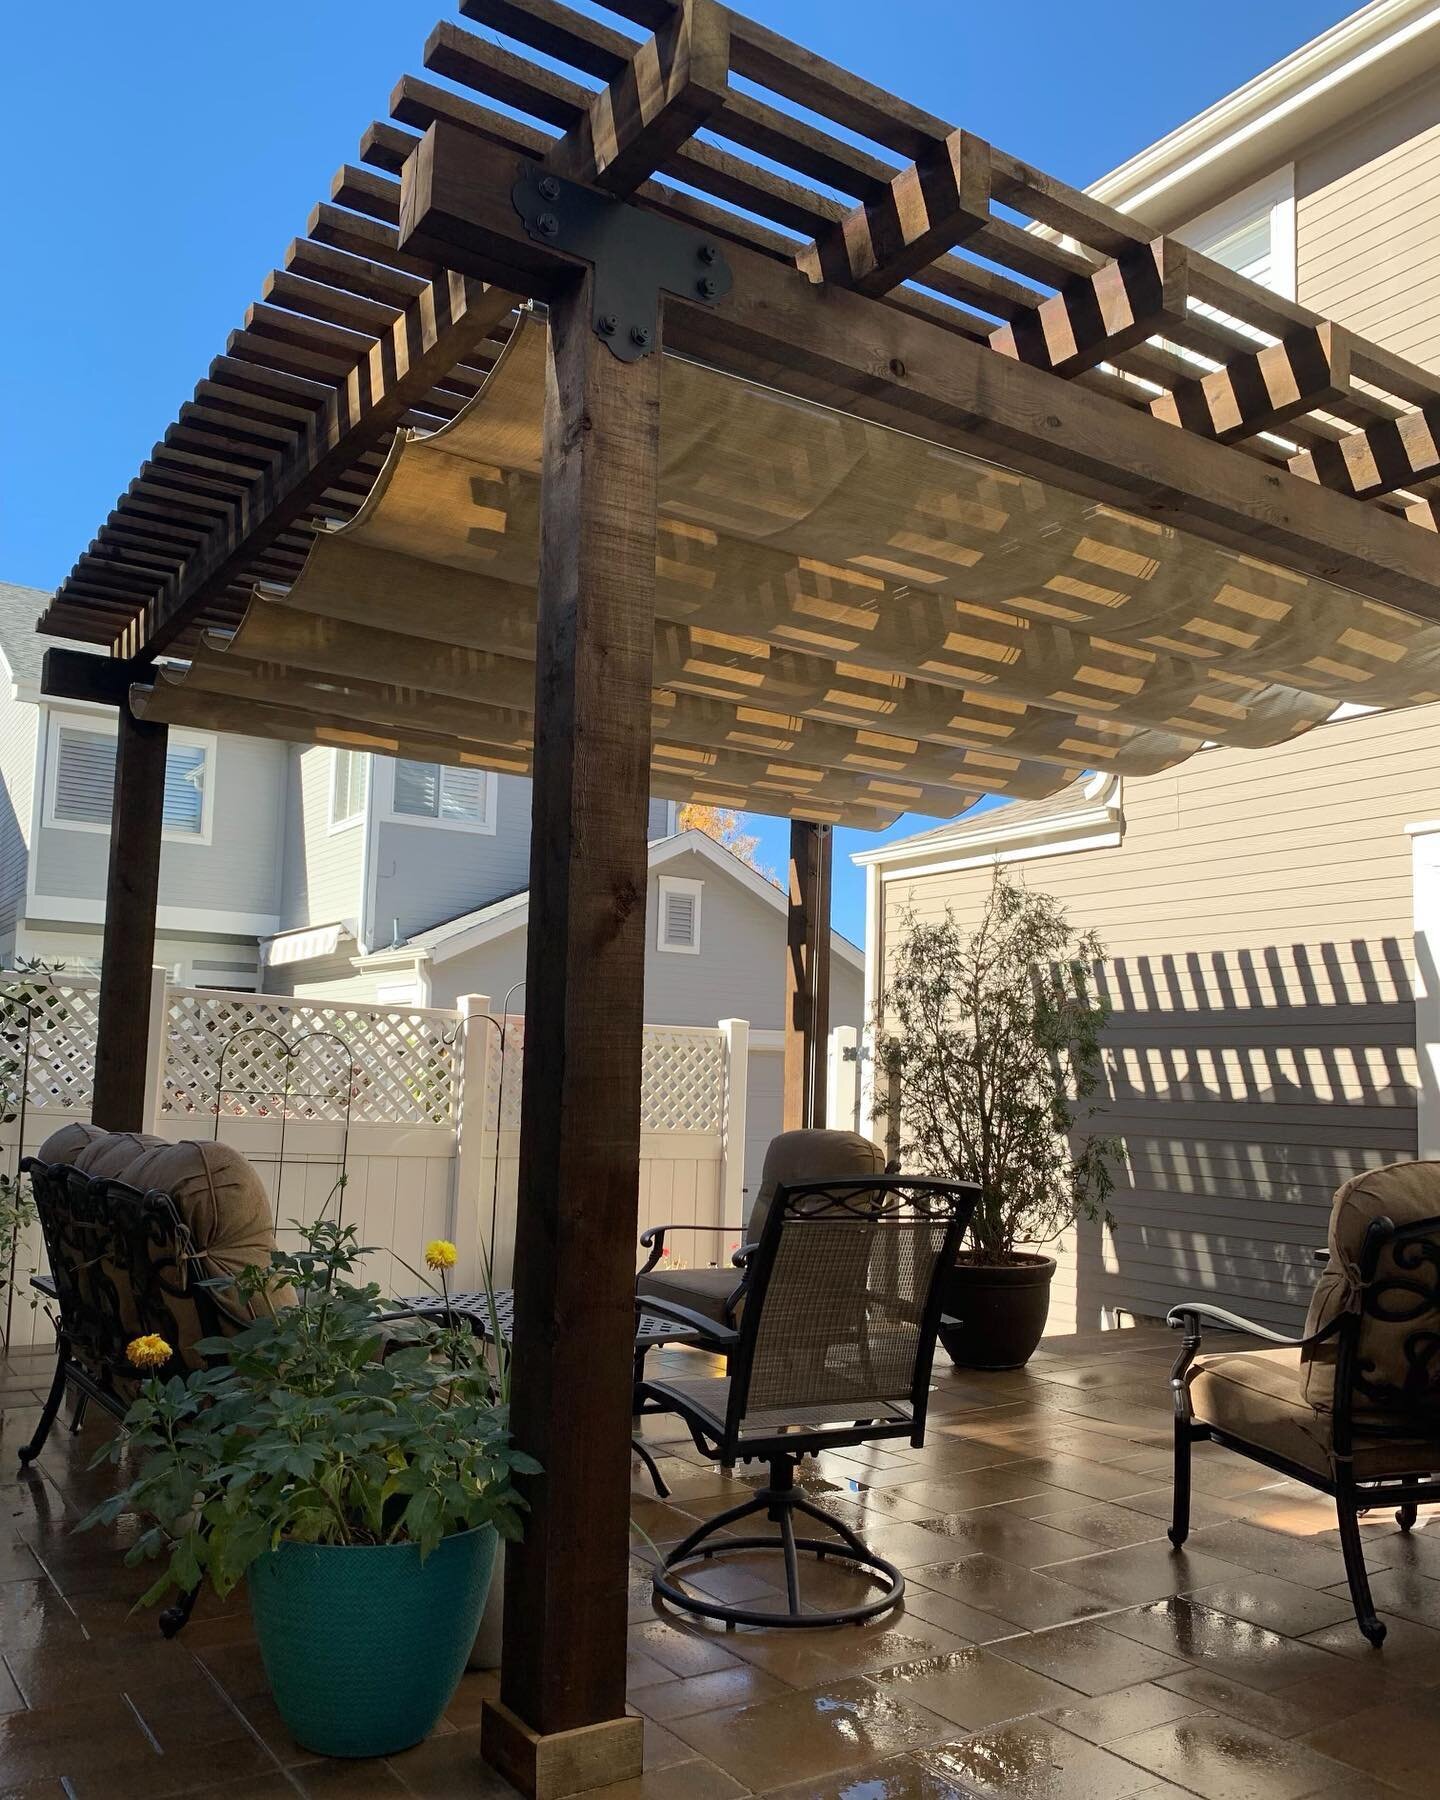 PSA: your home will look even better with a custom pergola! 🏡💯

Our crews stay busy building these bad boys year round + we can tell you confidently that a costum pergola instantly elevates your space!

Call us today to book your free discovery cal